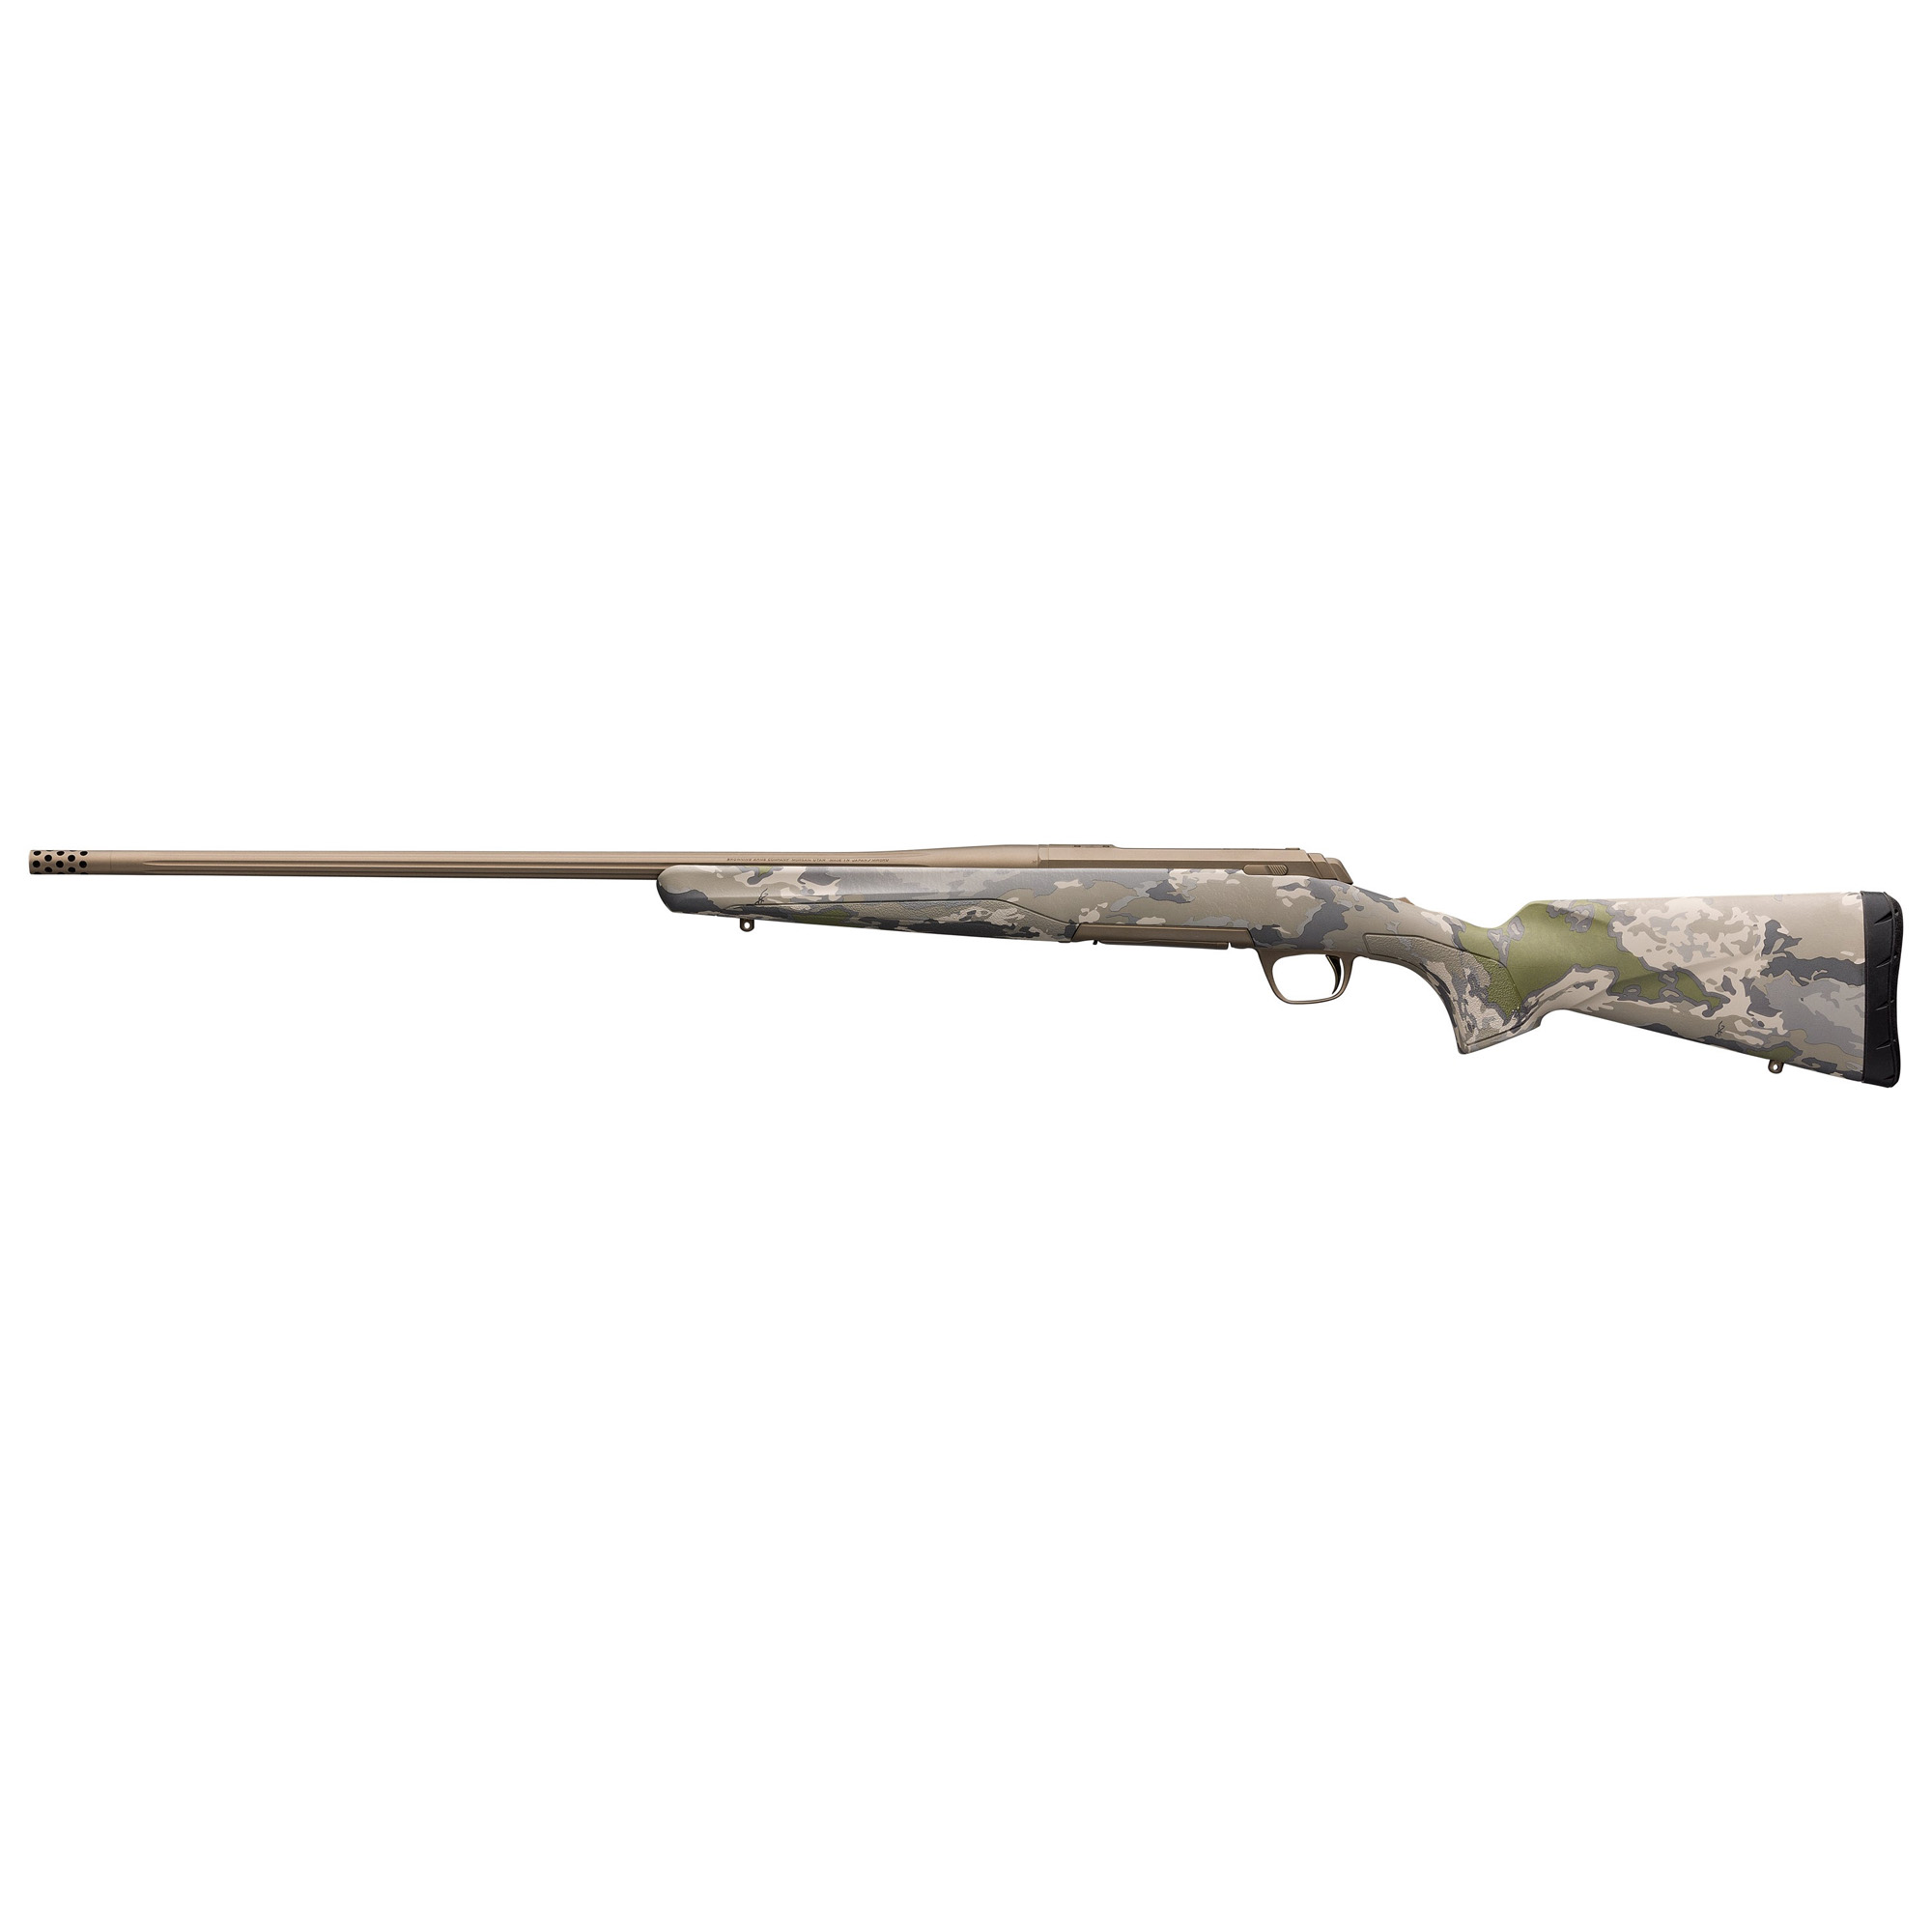 Browning, X-Bolt Speed, Hunting Rifle, Bolt Action, 308 Winchester, 22" Barrel, Fluted Barrel - Threaded M13X.75, Smoked Bronze, OVIX Camo Stock, 4 Rounds, Right Hand